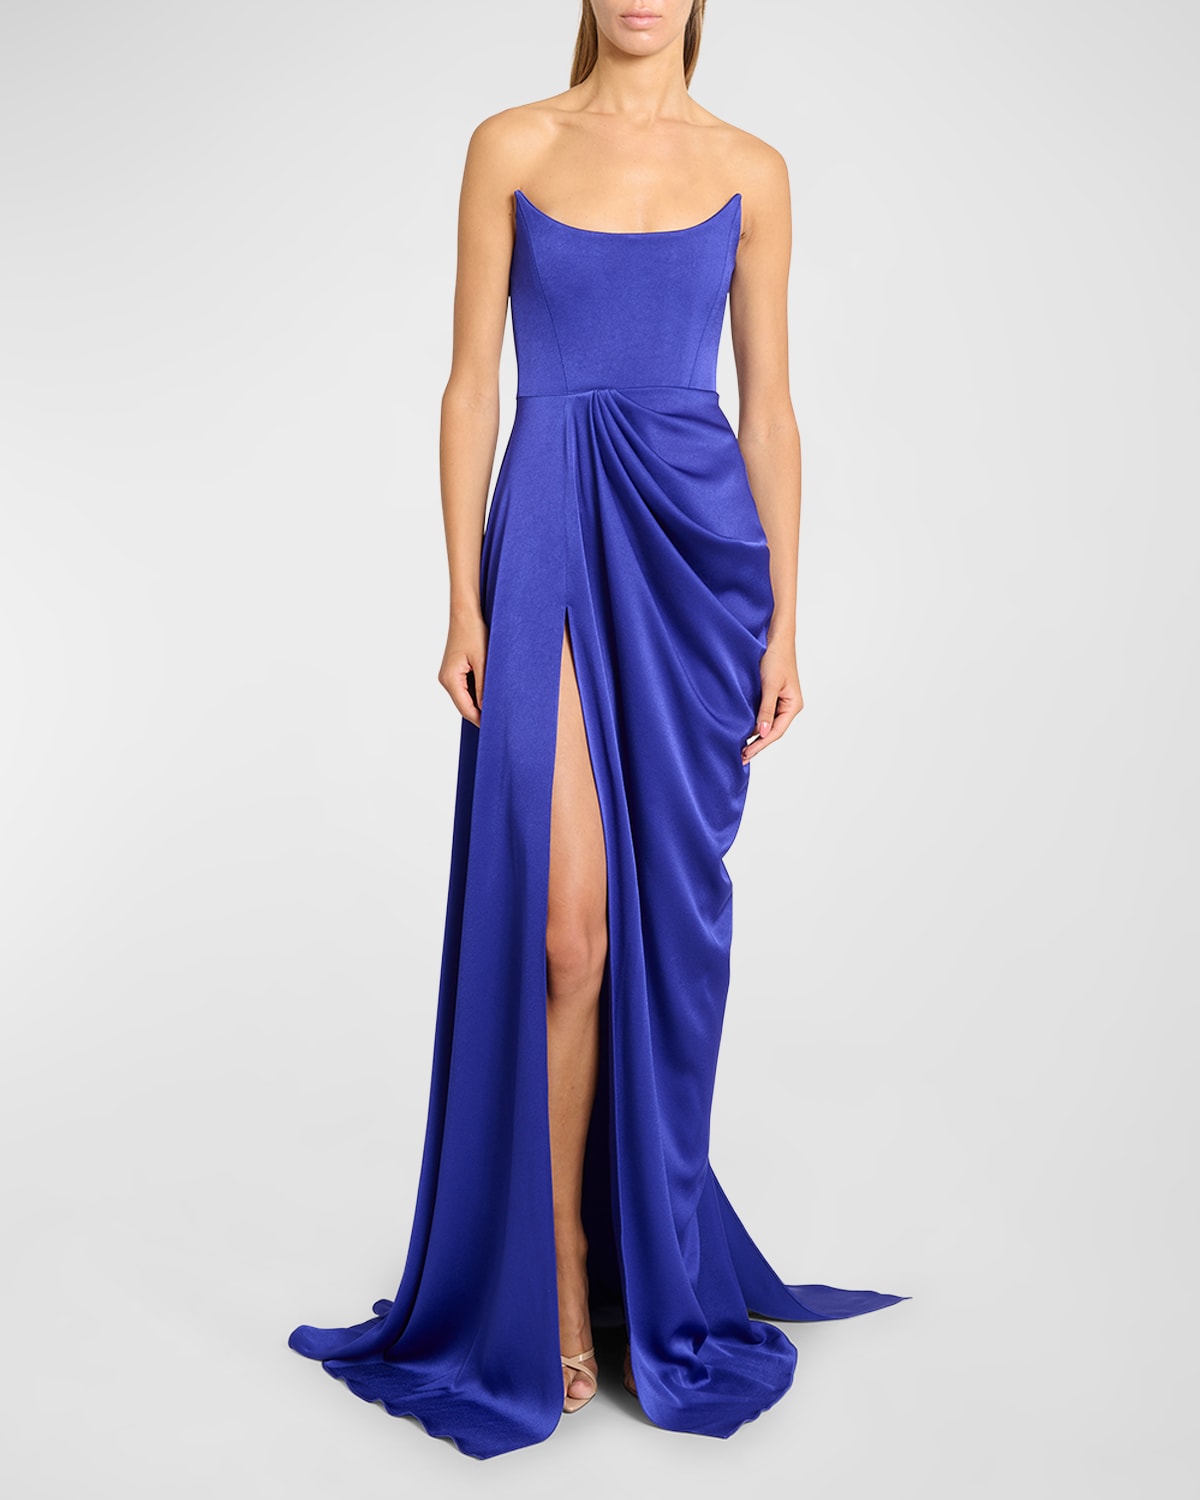 Alex Perry Curved Strapless Satin Crepe Drape Gown In Ultramarine